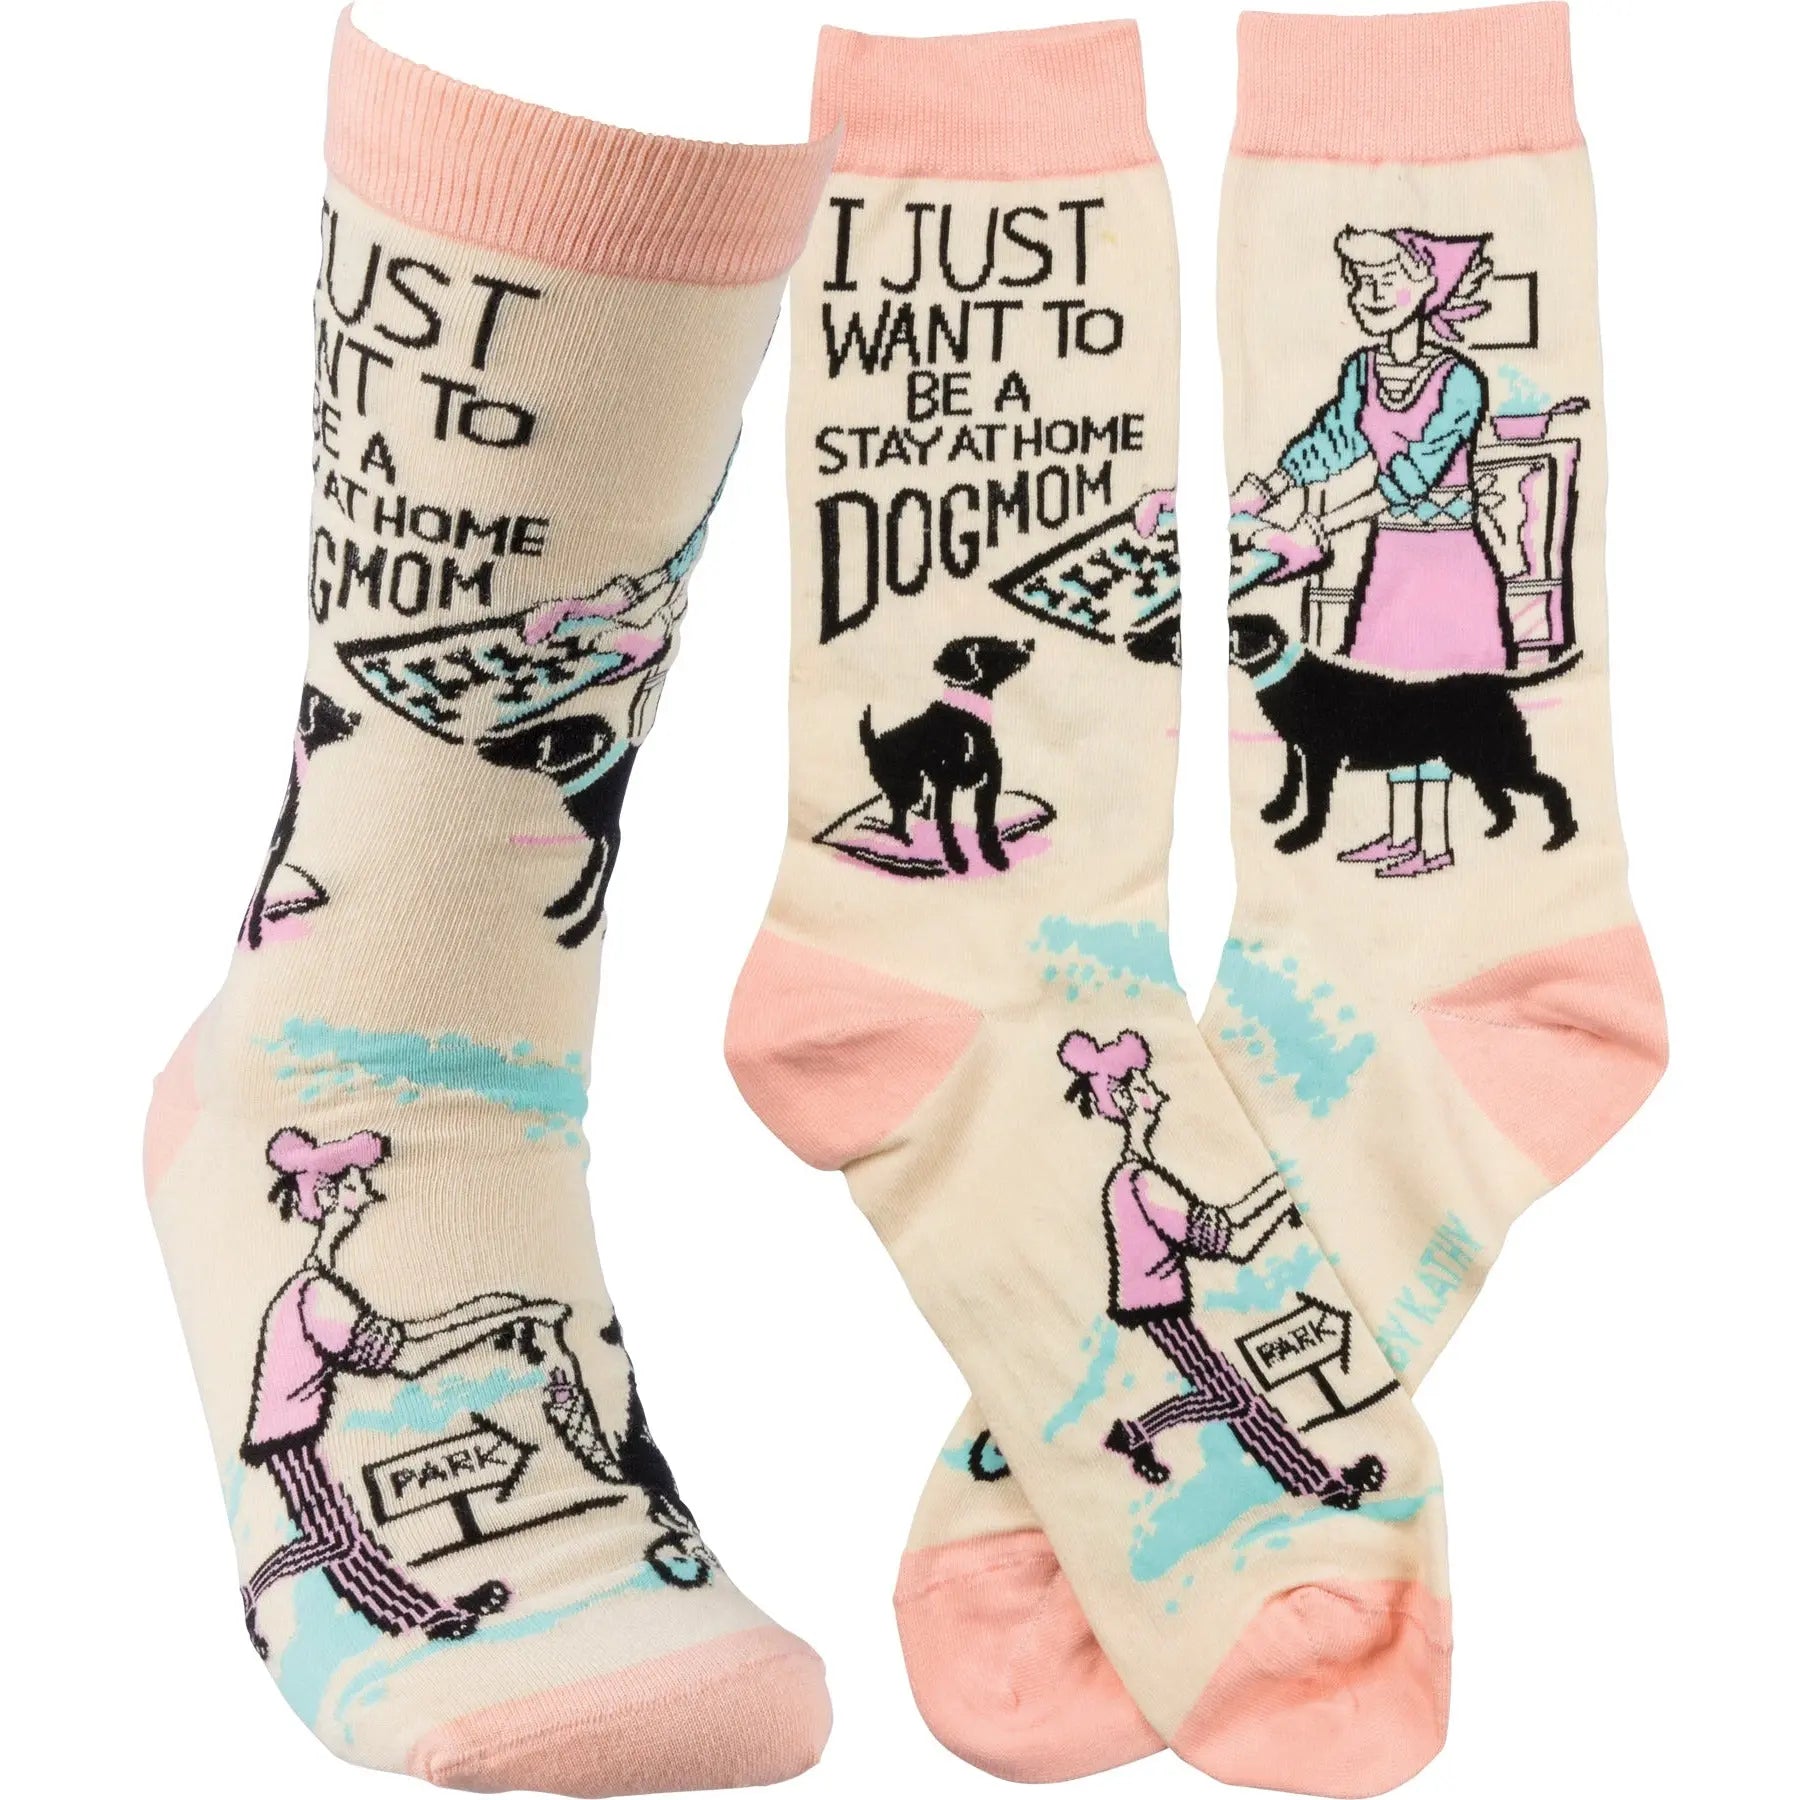 Primitives By Kathy - "Stay At Home Dog Mom" Socks PRIMITIVES BY KATHY